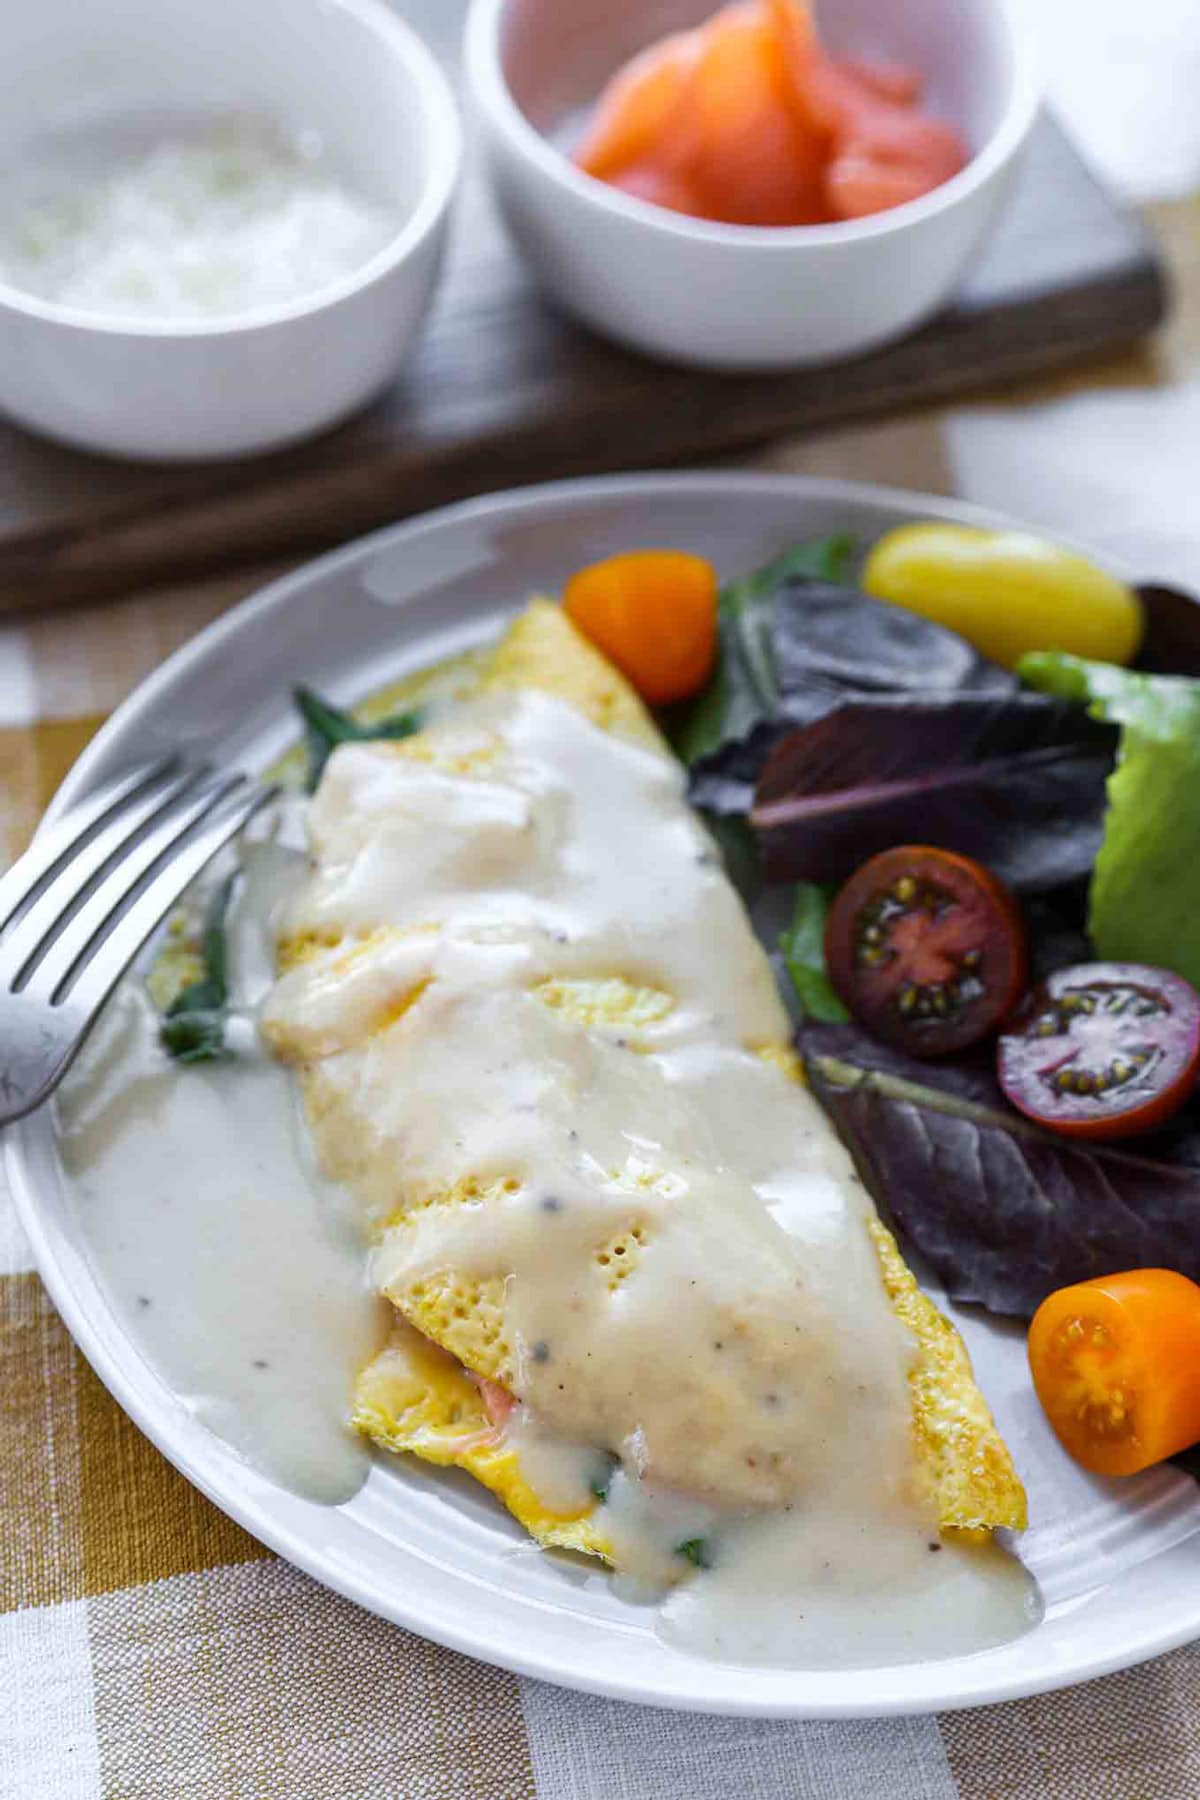 smoked salmon omelette with white sauce